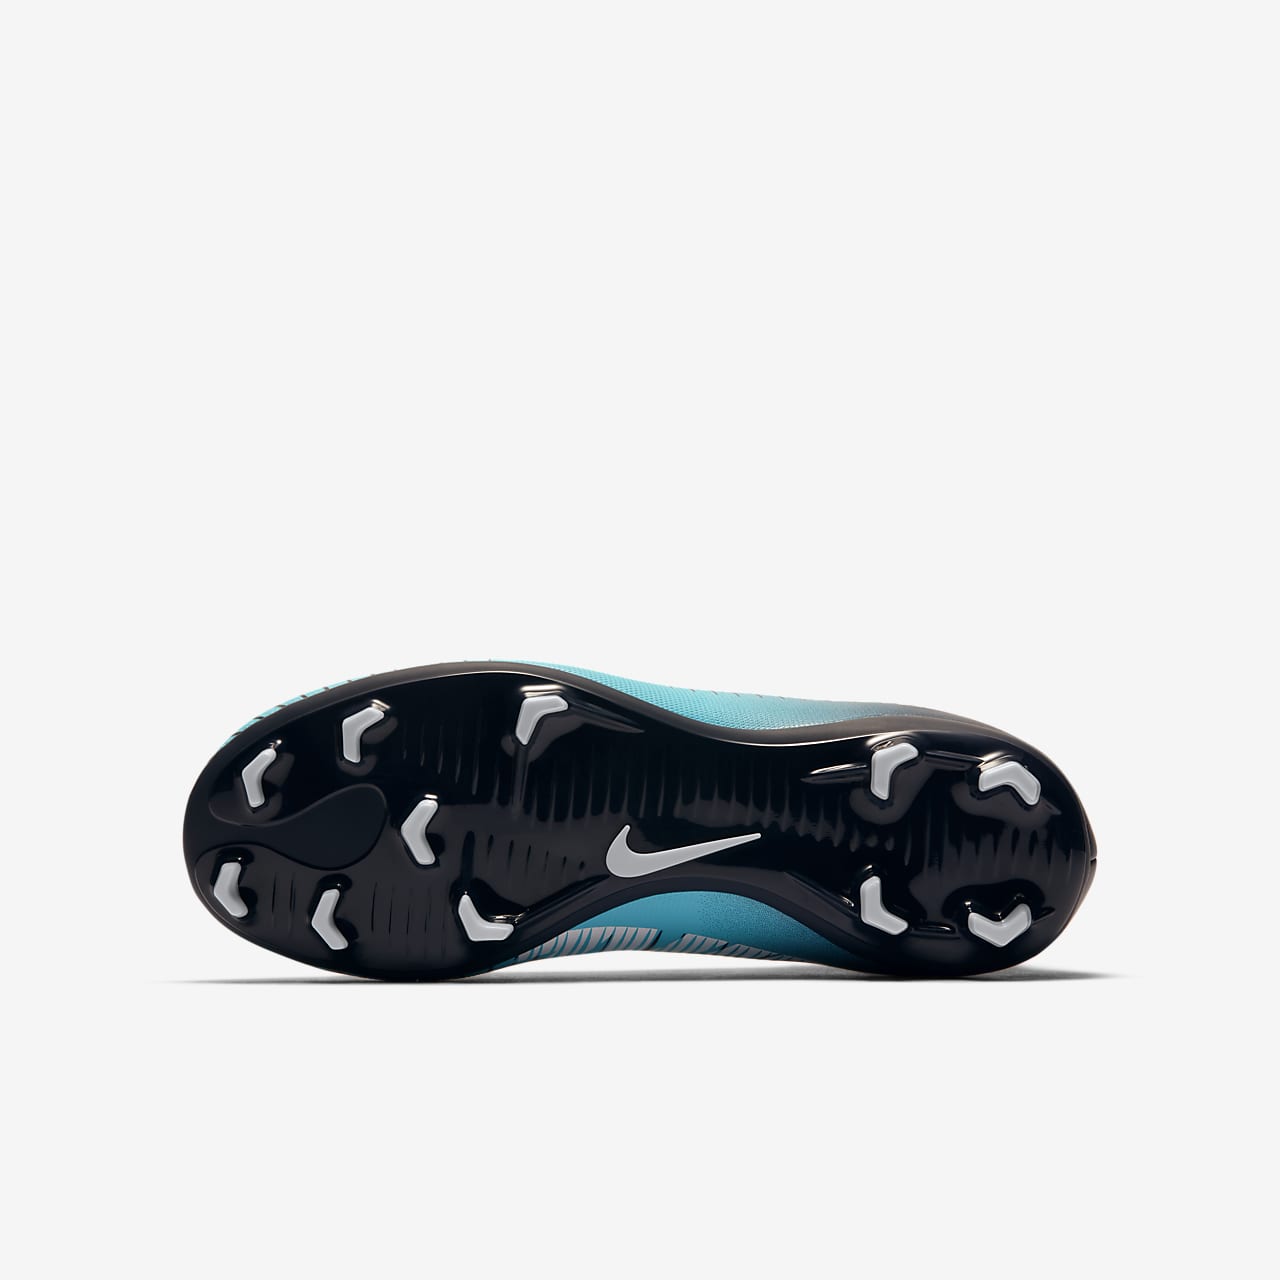 Nike Jr. Mercurial Victory VI Dynamic Fit Little/Big Kids' Firm-Ground Soccer Cleat.